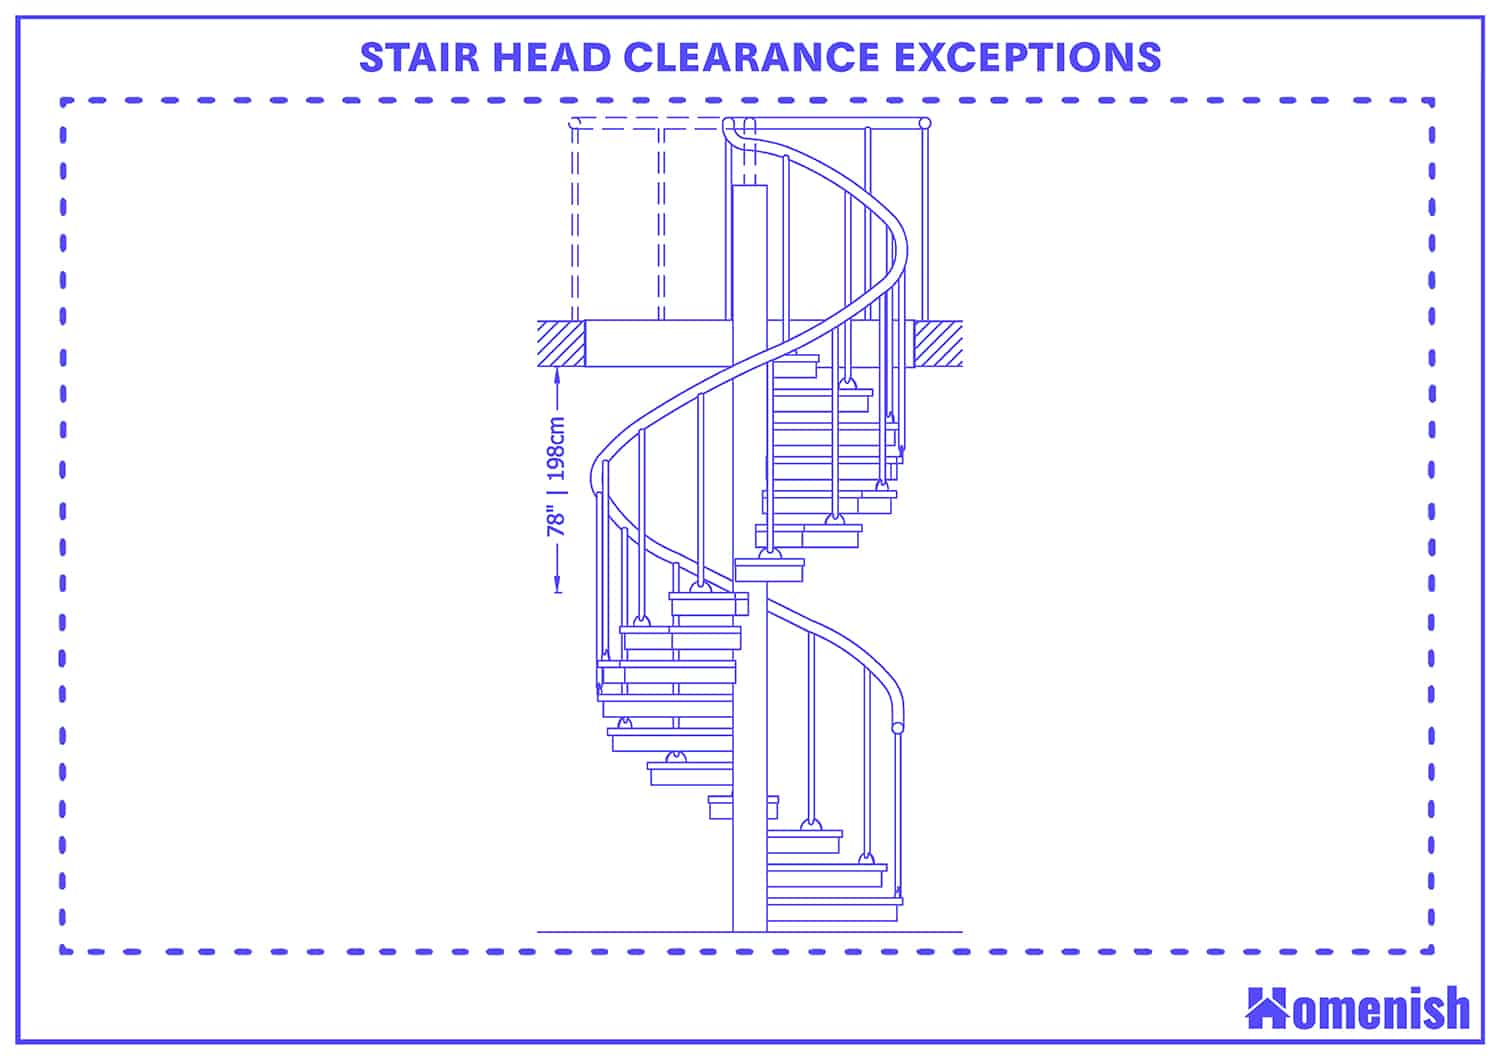 Stair head clearance exceptions